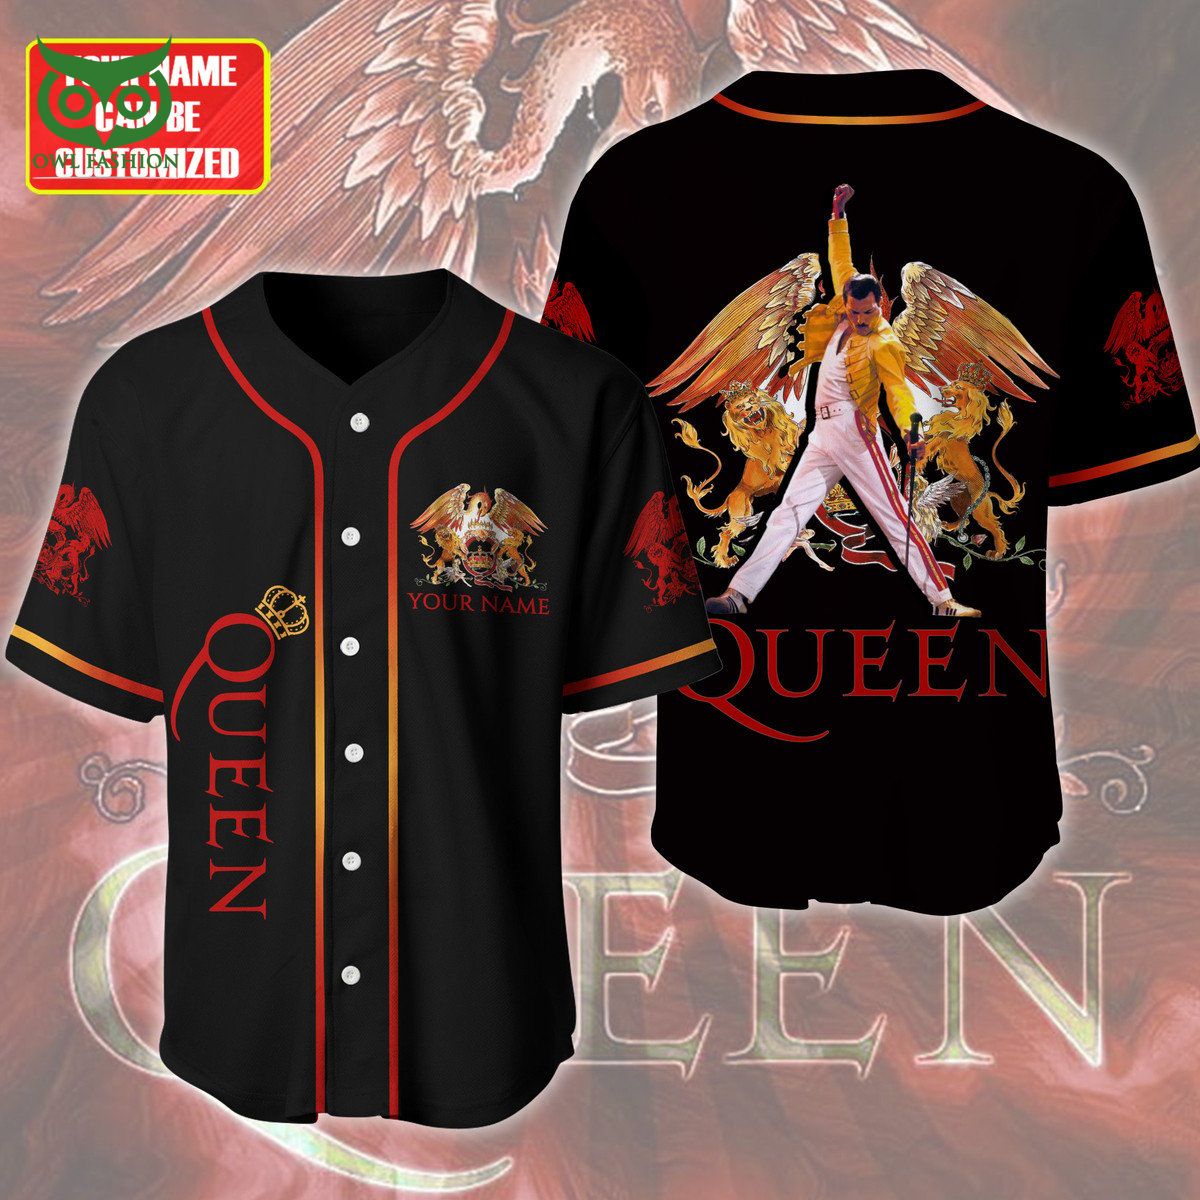 Queen King Of Rock Bands Personalized Baseball Jersey Shirt Out of the world